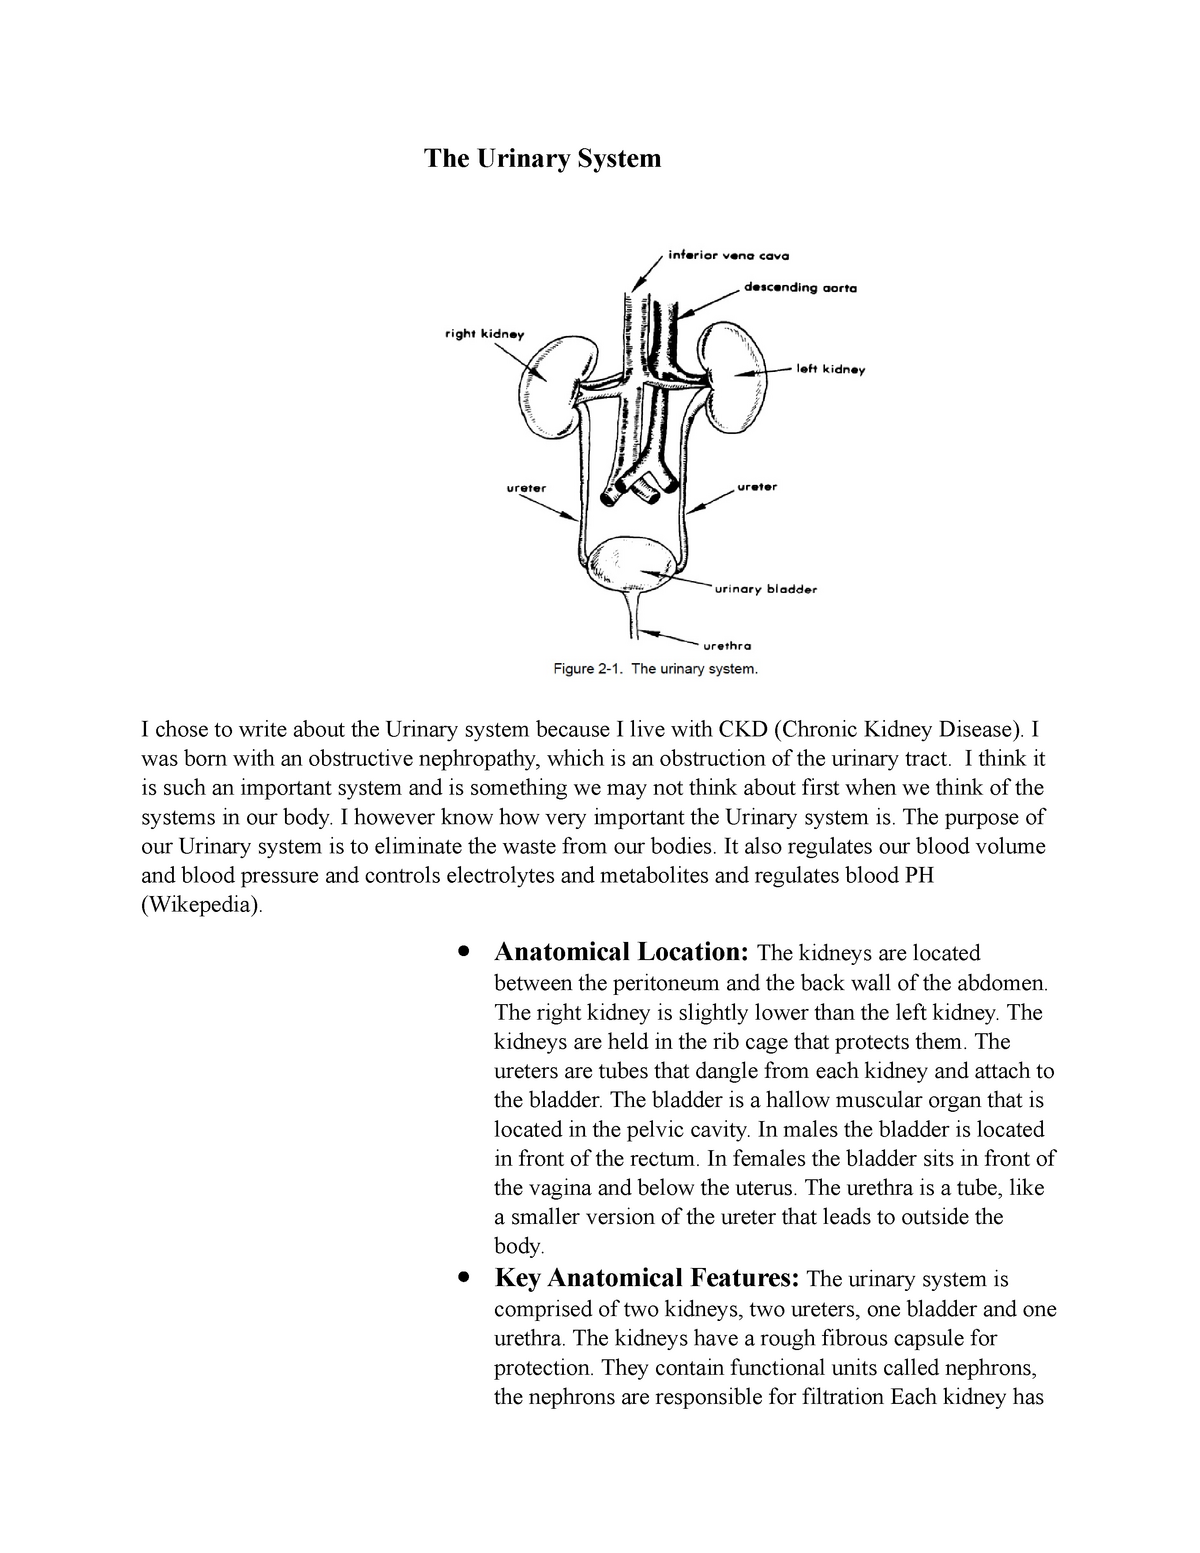 Urinary system: The Histology Guide